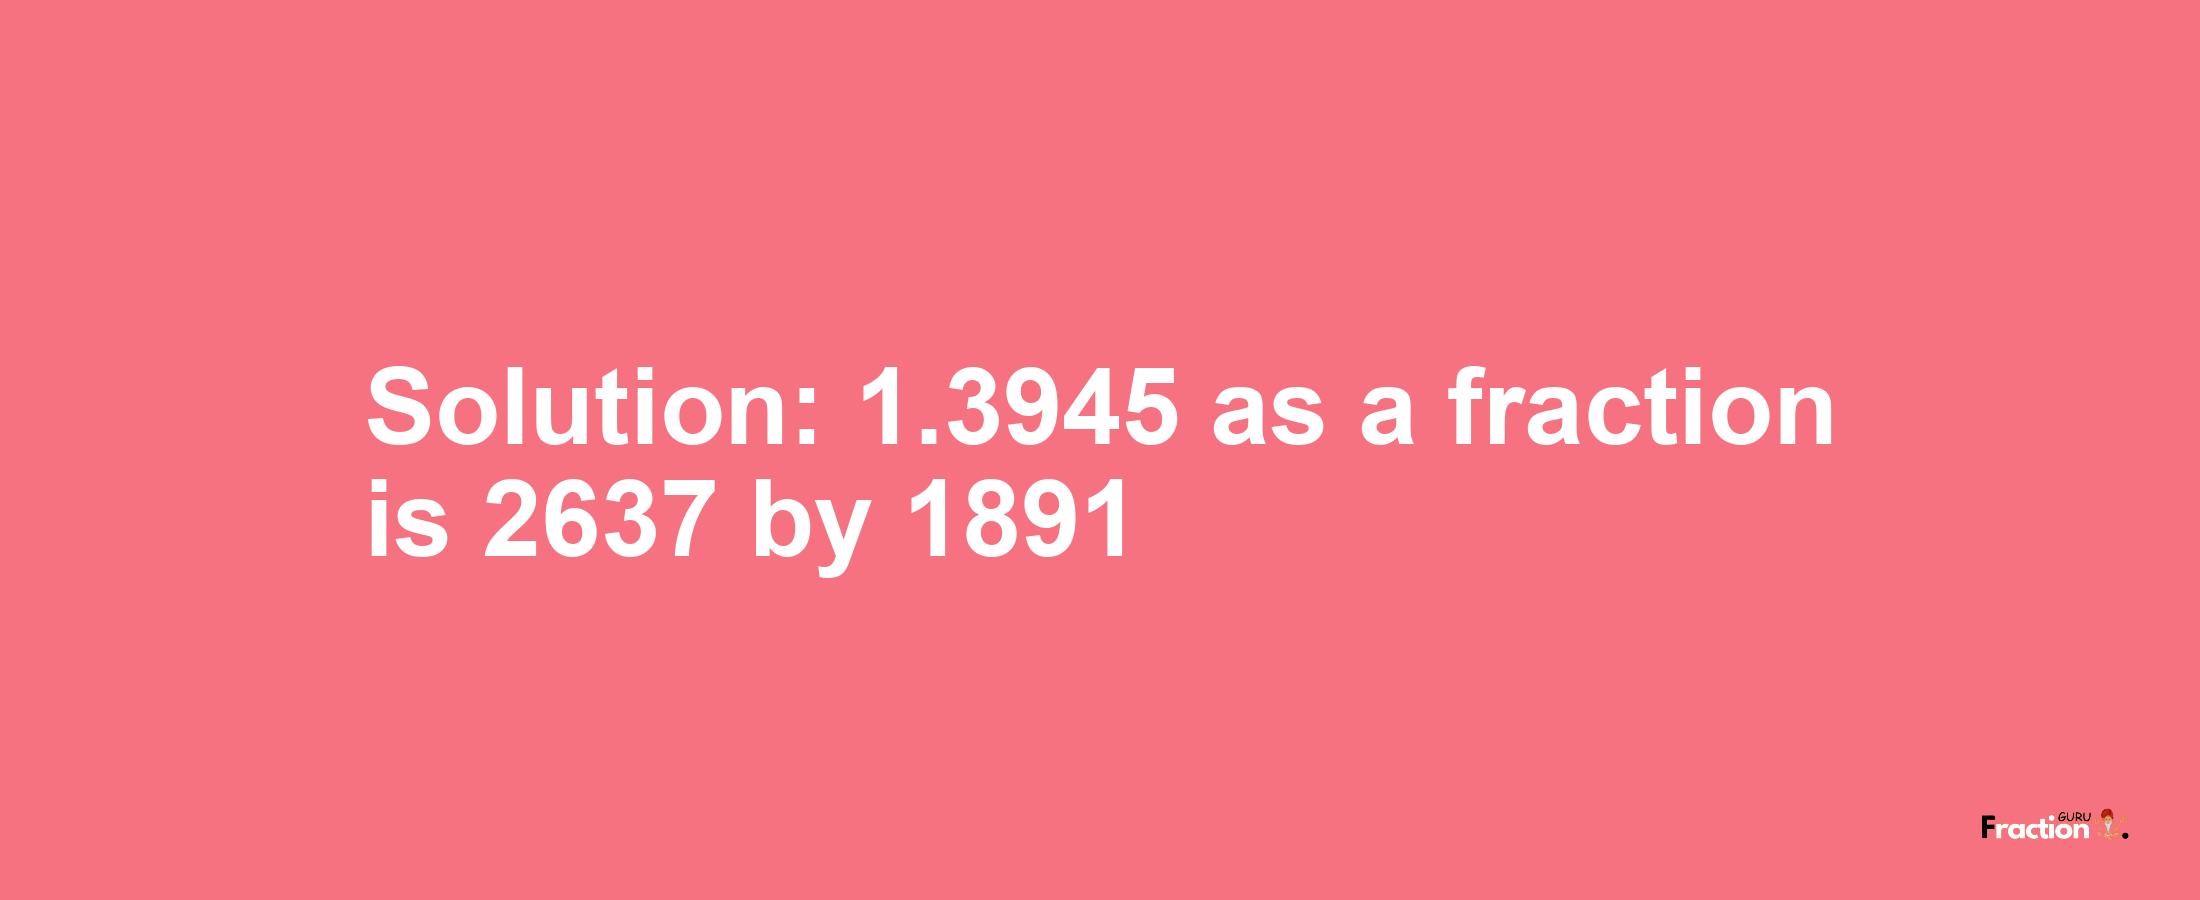 Solution:1.3945 as a fraction is 2637/1891